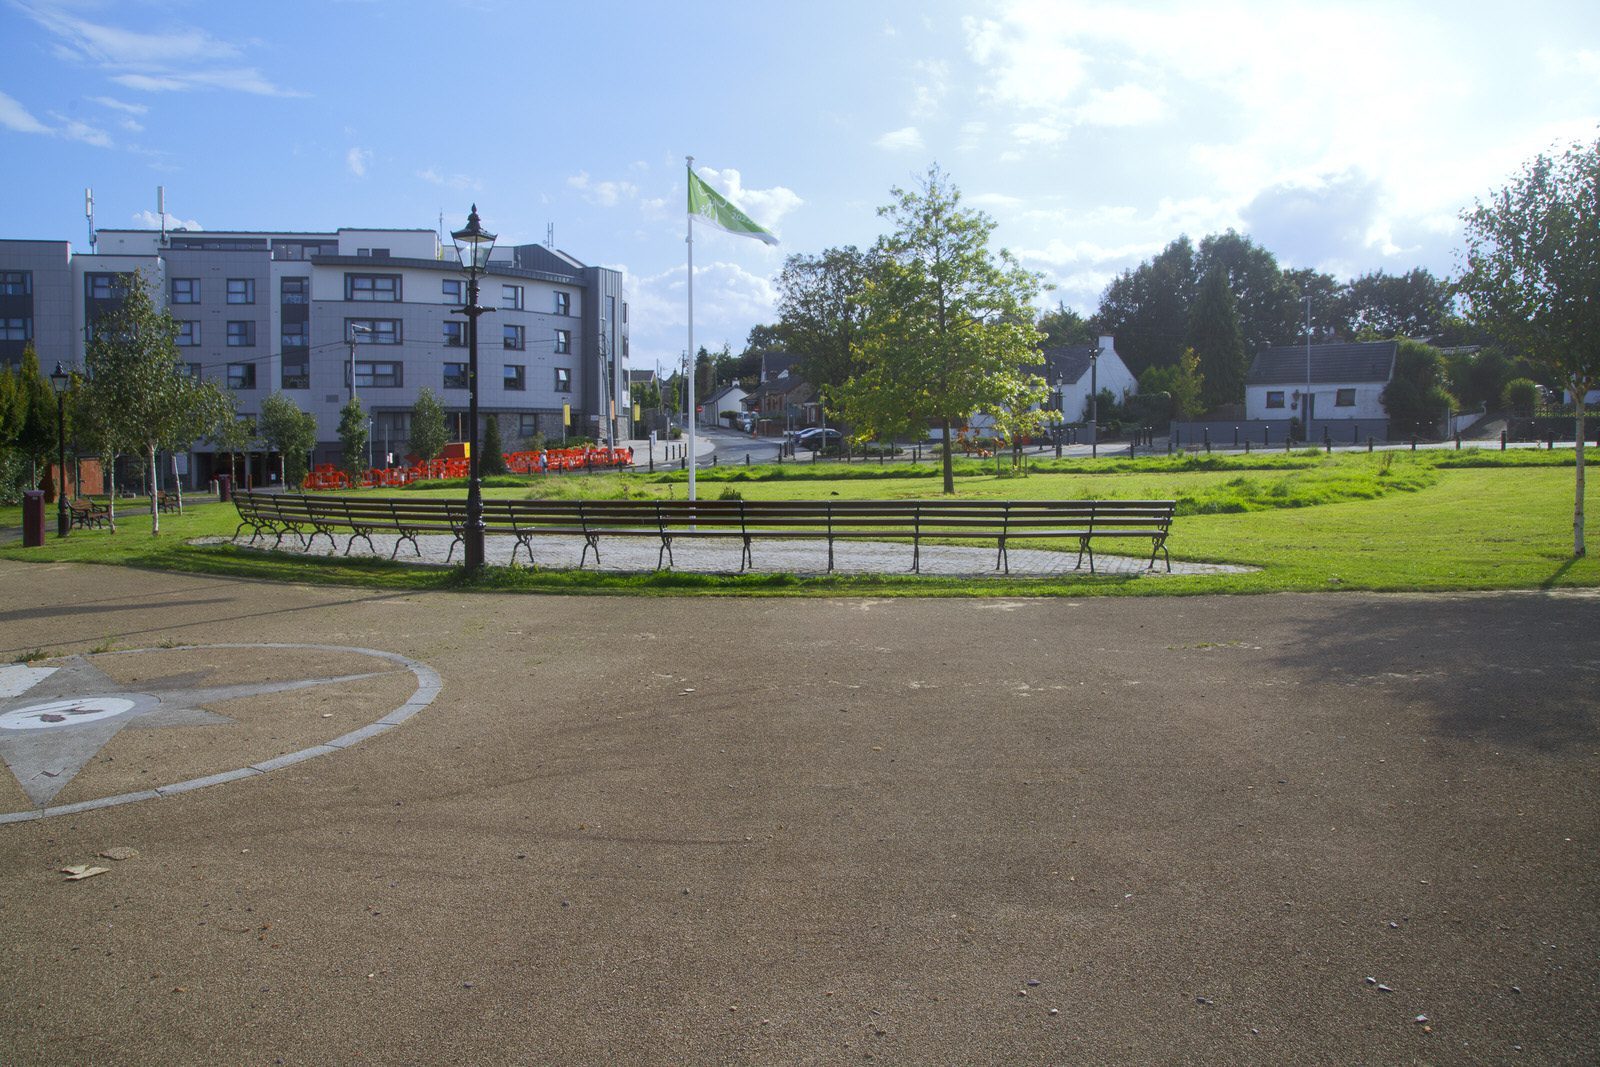 BRIDGE STREET IN SWORDS [AND A SMALL GREEN SPACE] 010